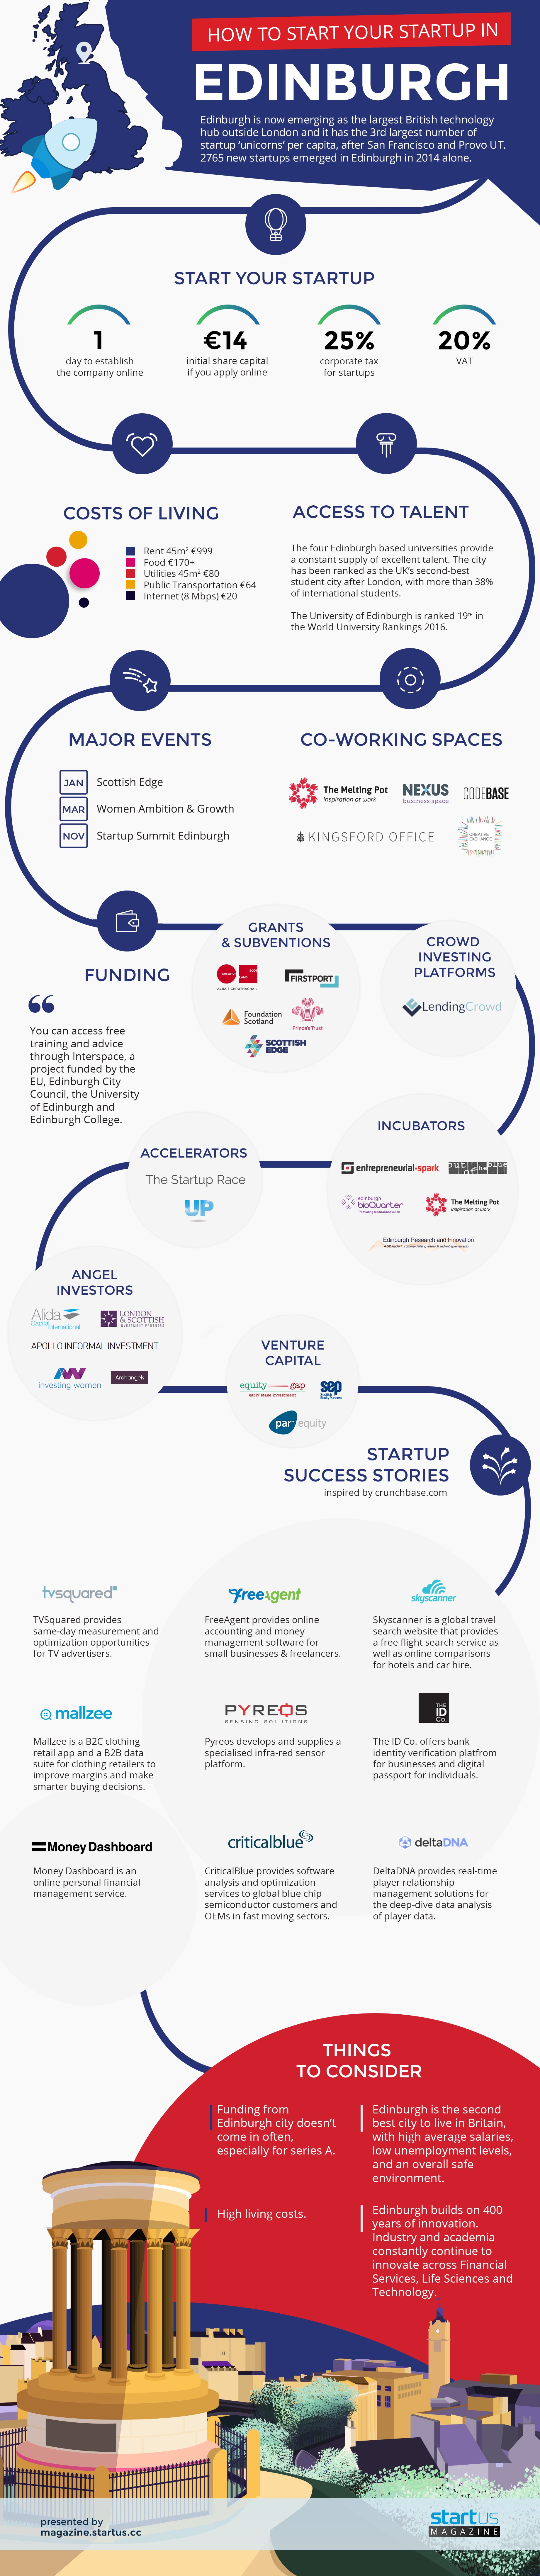 Infographic: How To Start Your Startup In Edinburgh